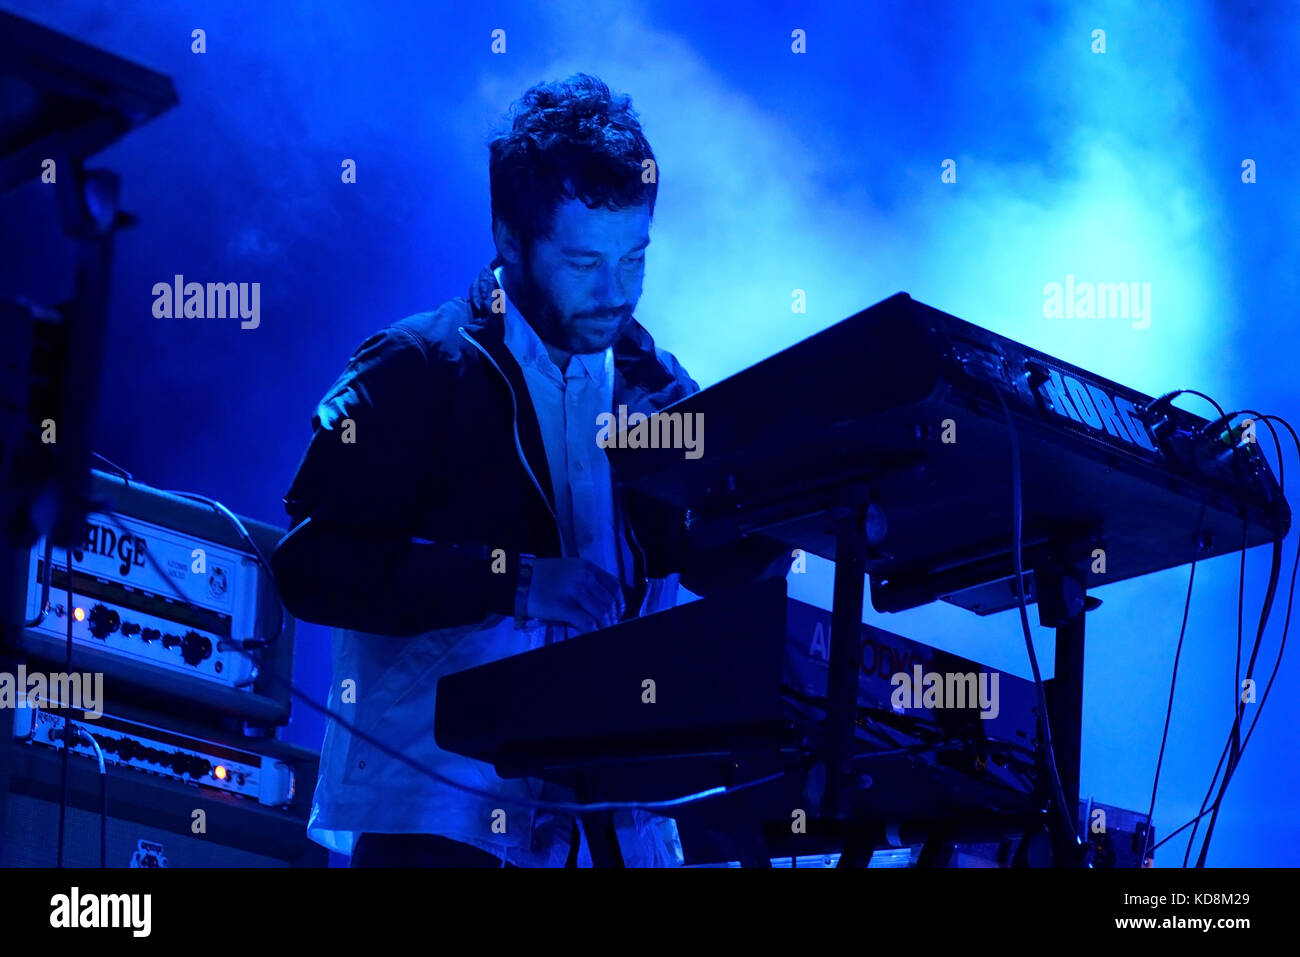 BARCELONA - JUN 1: Survive (electronic music band) perform in concert at Primavera Sound 2017 Festival on June 1, 2017 in Barcelona, Spain. Stock Photo